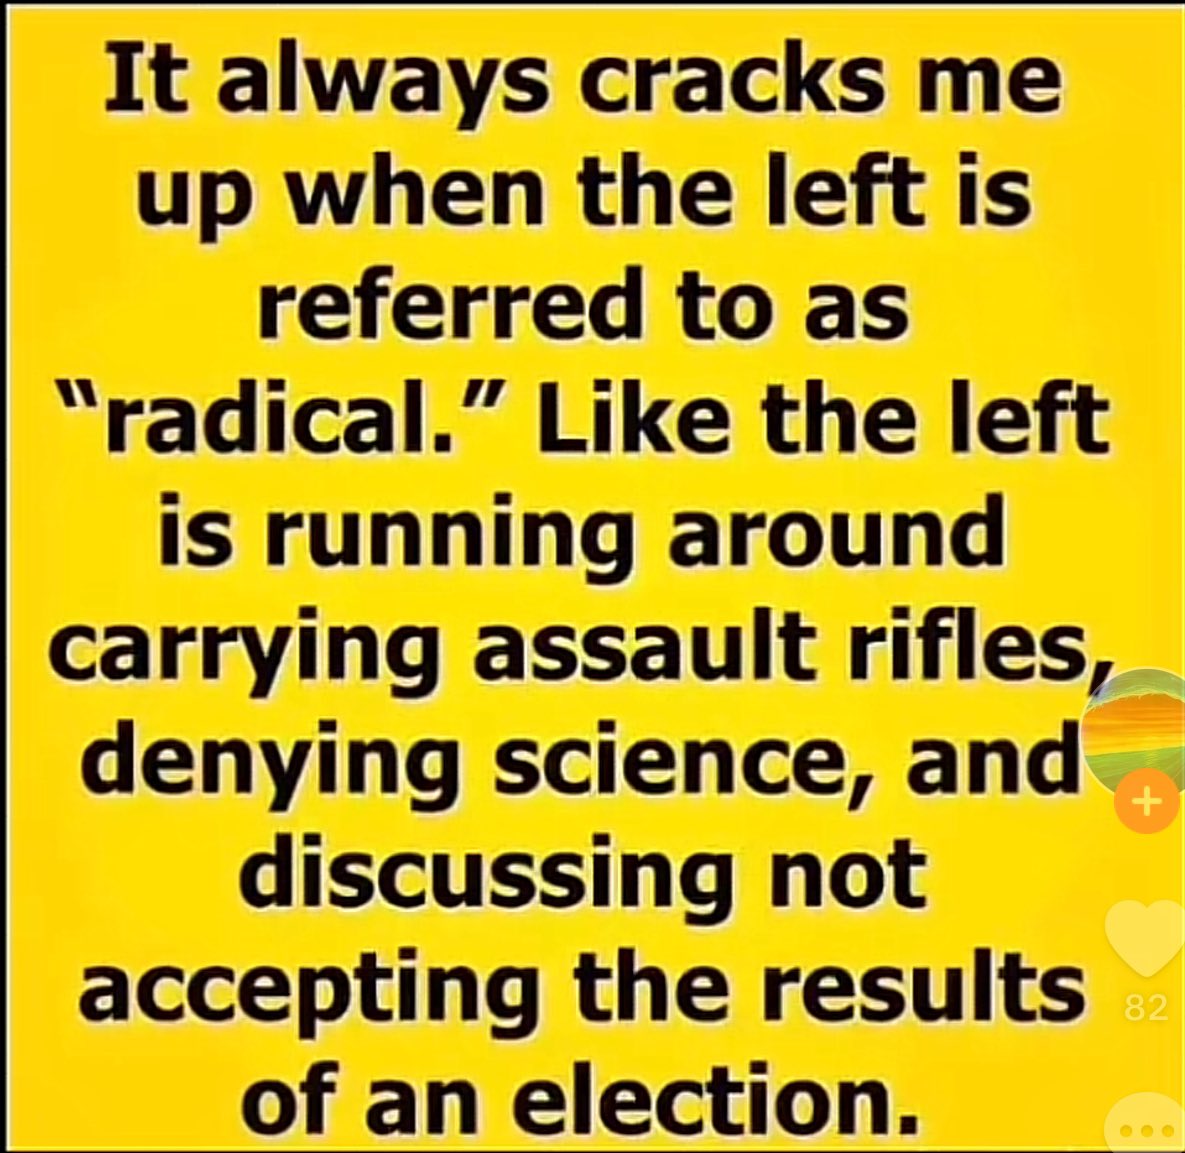 Especially the science part. Christian MAGA’s are absolutely fucking stupid. They don’t even understand basic science or civics. Or history. Or English. Or math.